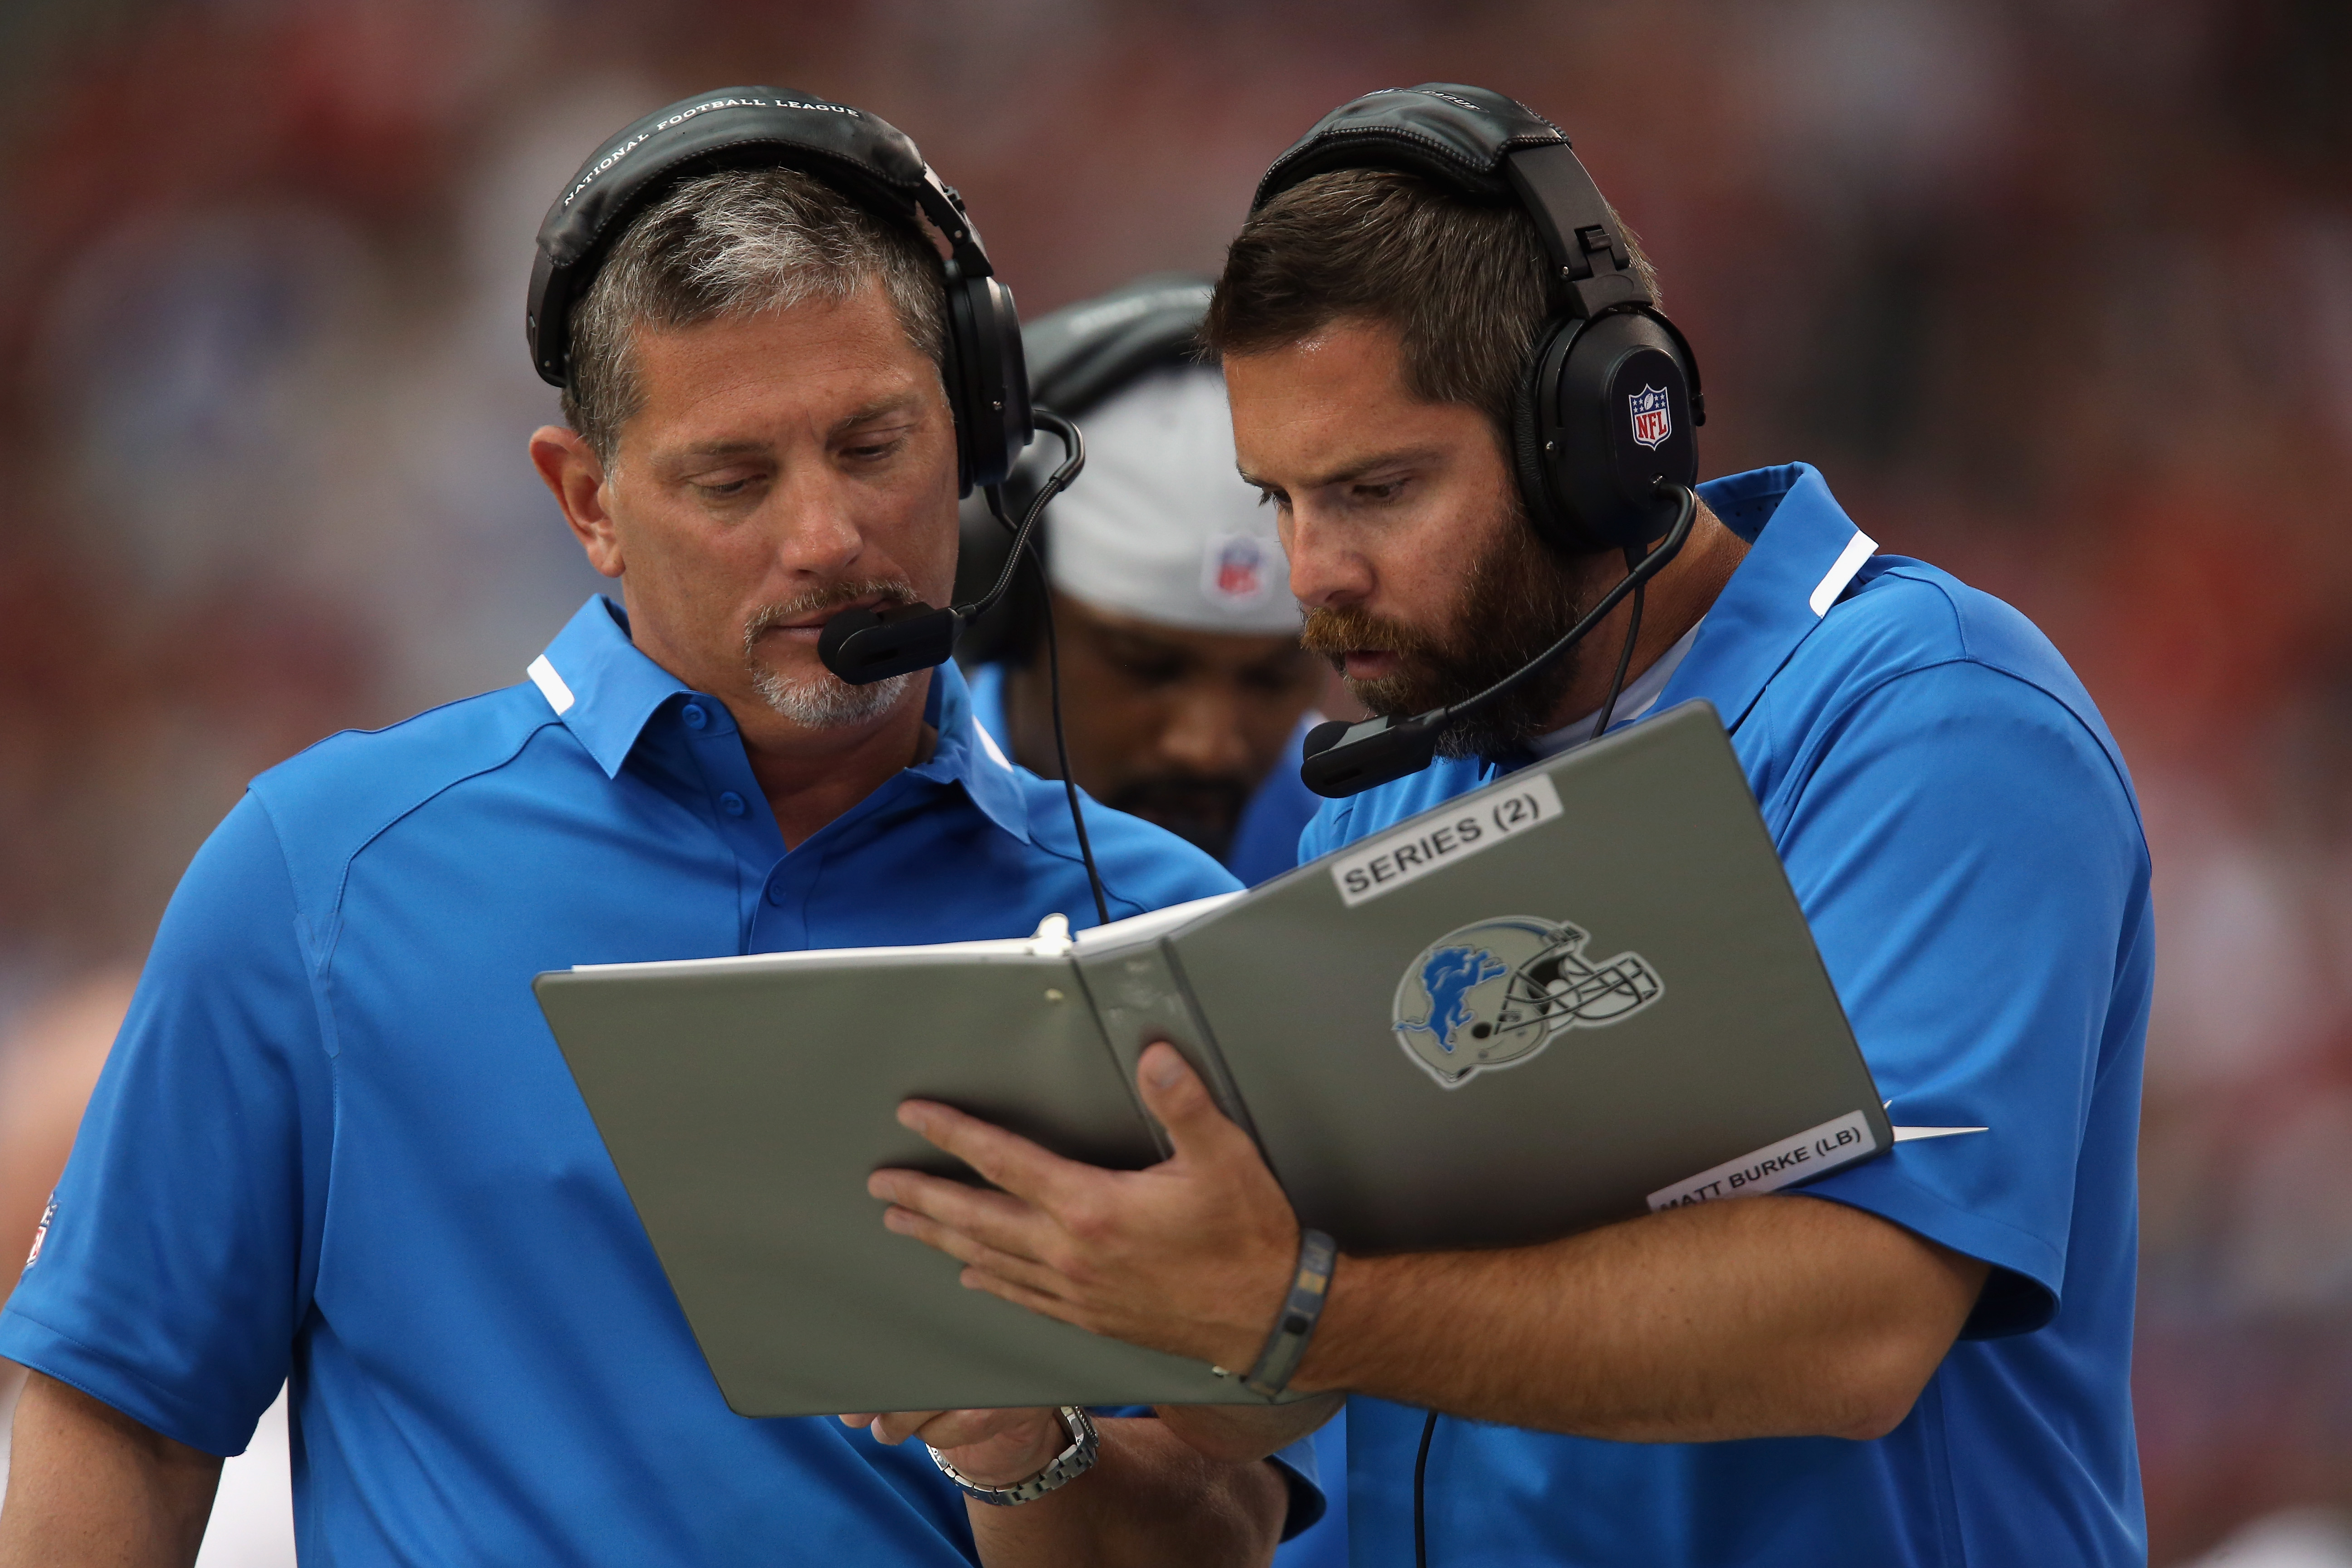 Matt Burke is now on the list of Dolphins Defensive Coordinators who promised to attack.